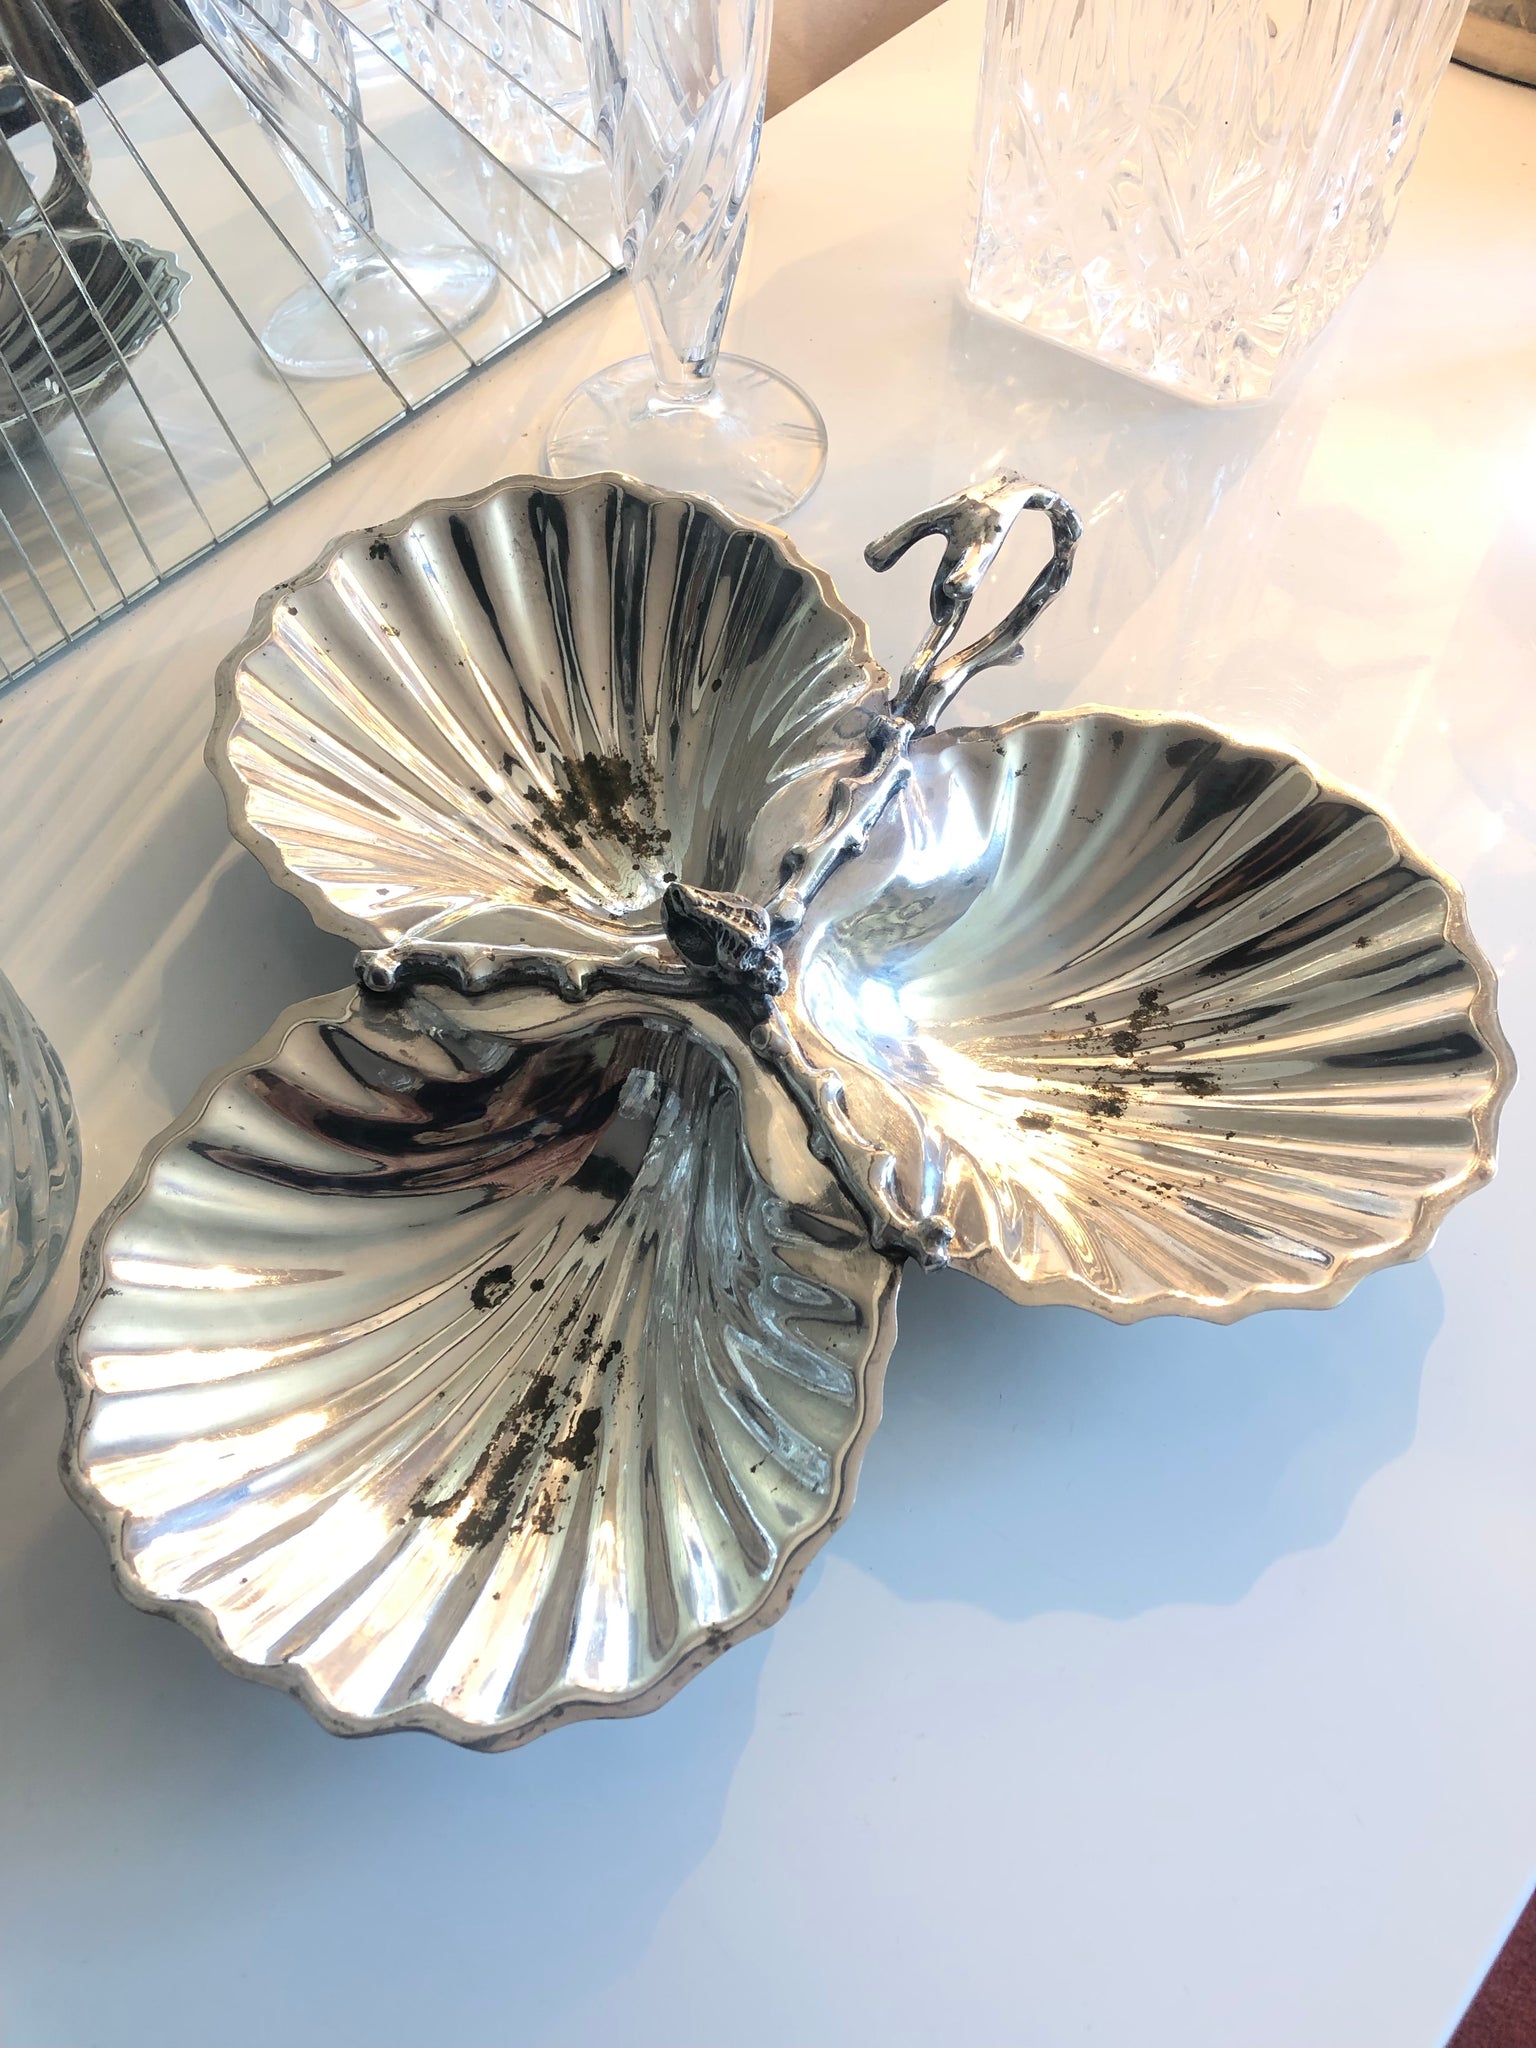 Vintage French Clam Shell Serving Metal Gold Plate Bowl Dish Catch-All  Table Ornament Jewellery Jewelry c1970-1980's / EVE